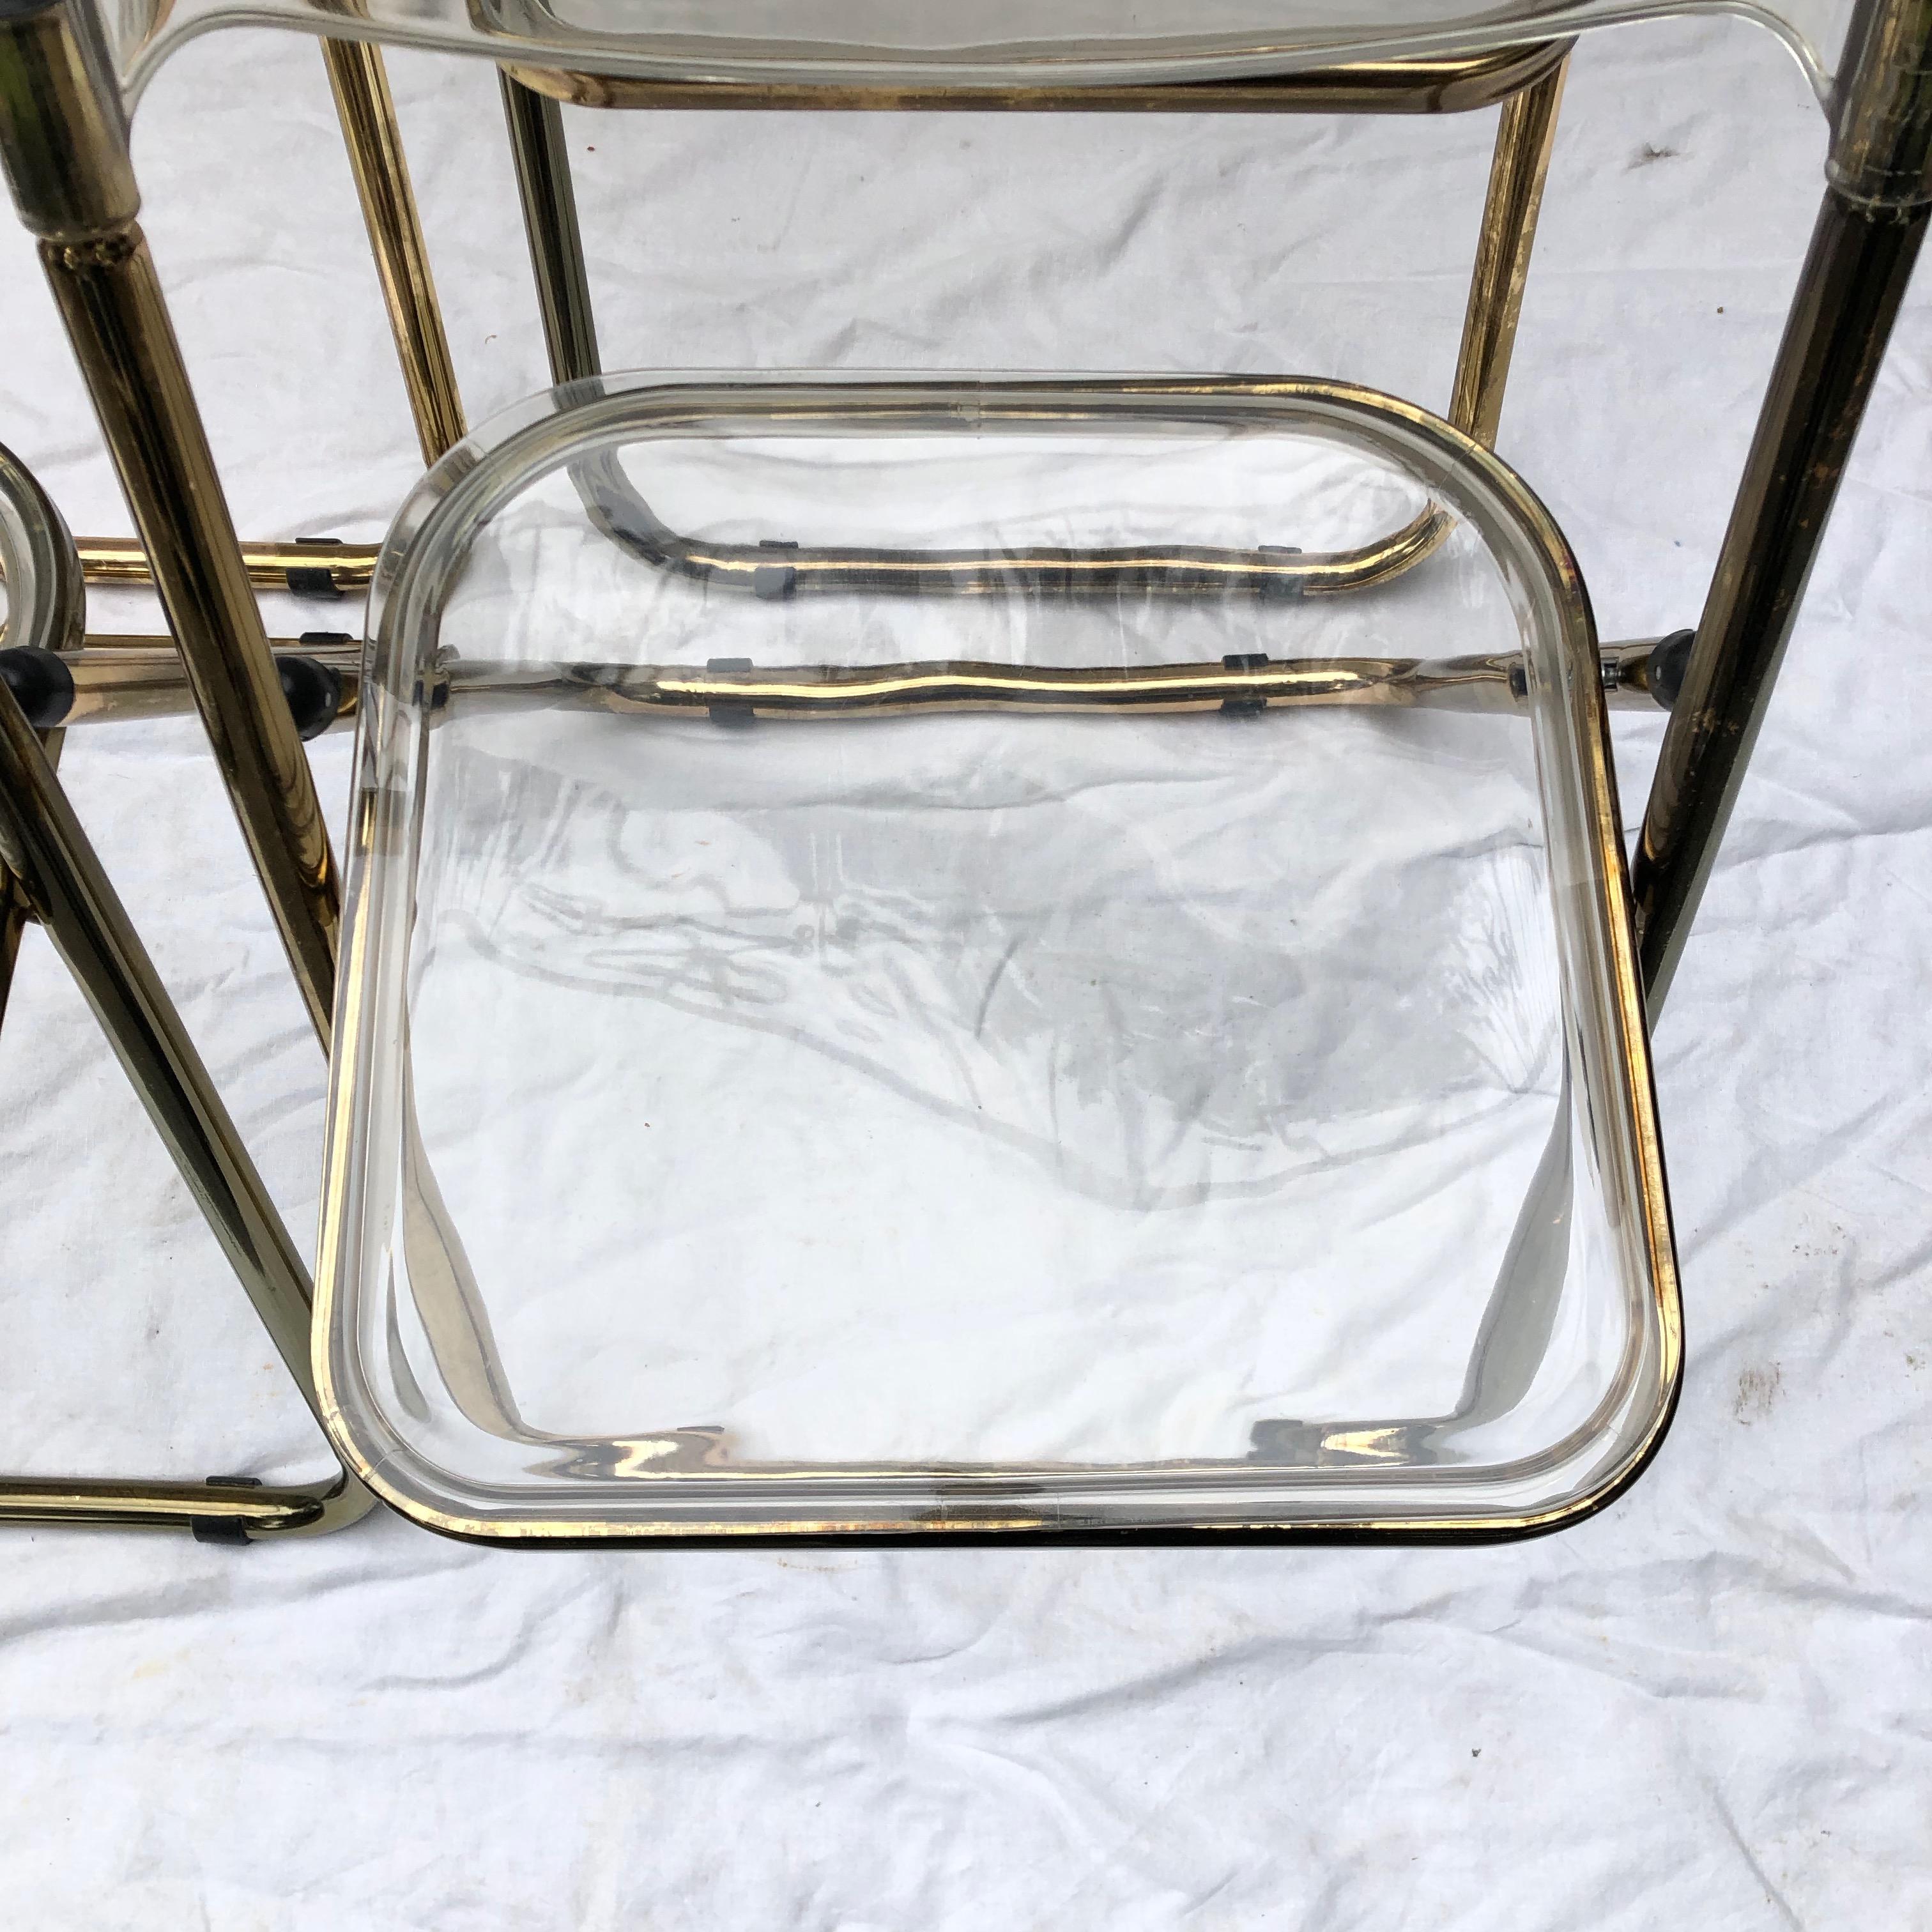 gold folding chairs